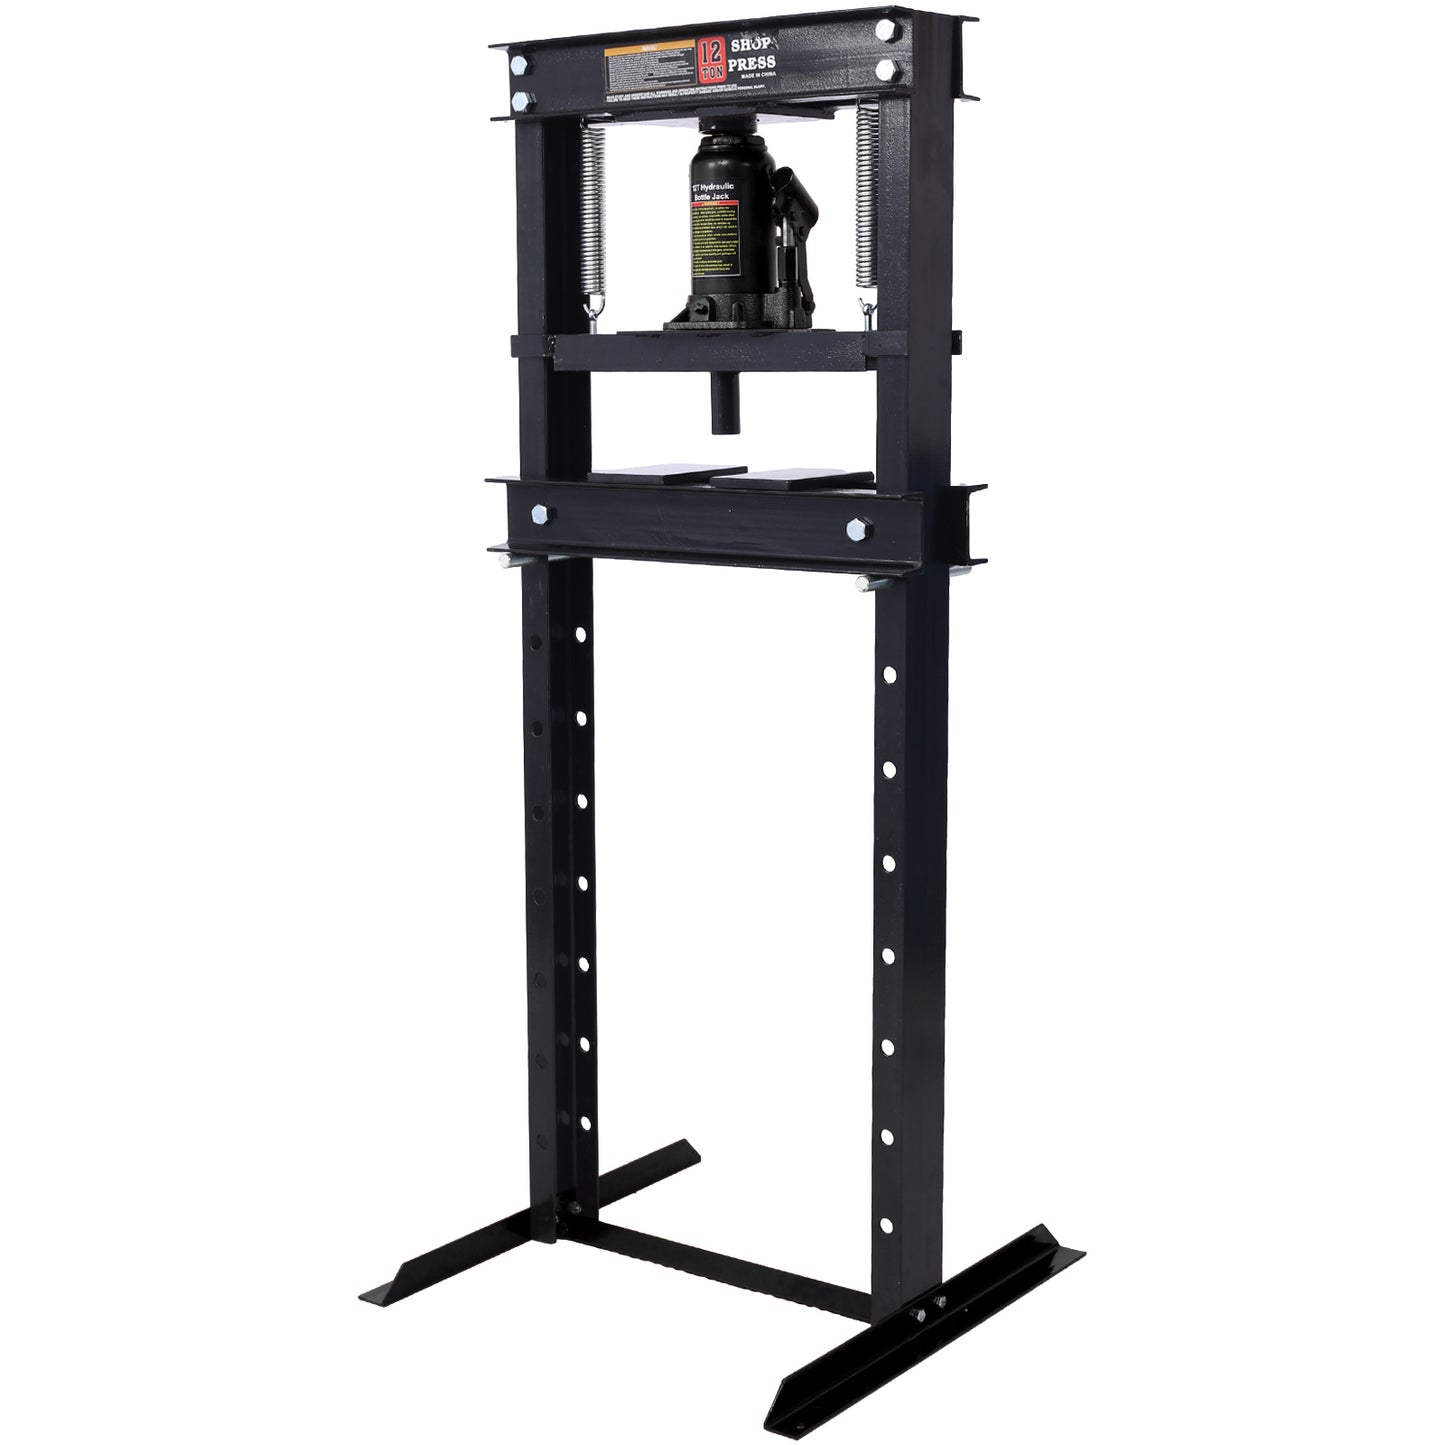 Hydraulic Shop Press ,12-Ton Capacity , Floor Mount ,with Press Plates, H-Frame Garage Floor Press, Adjustable Working Table Height,black